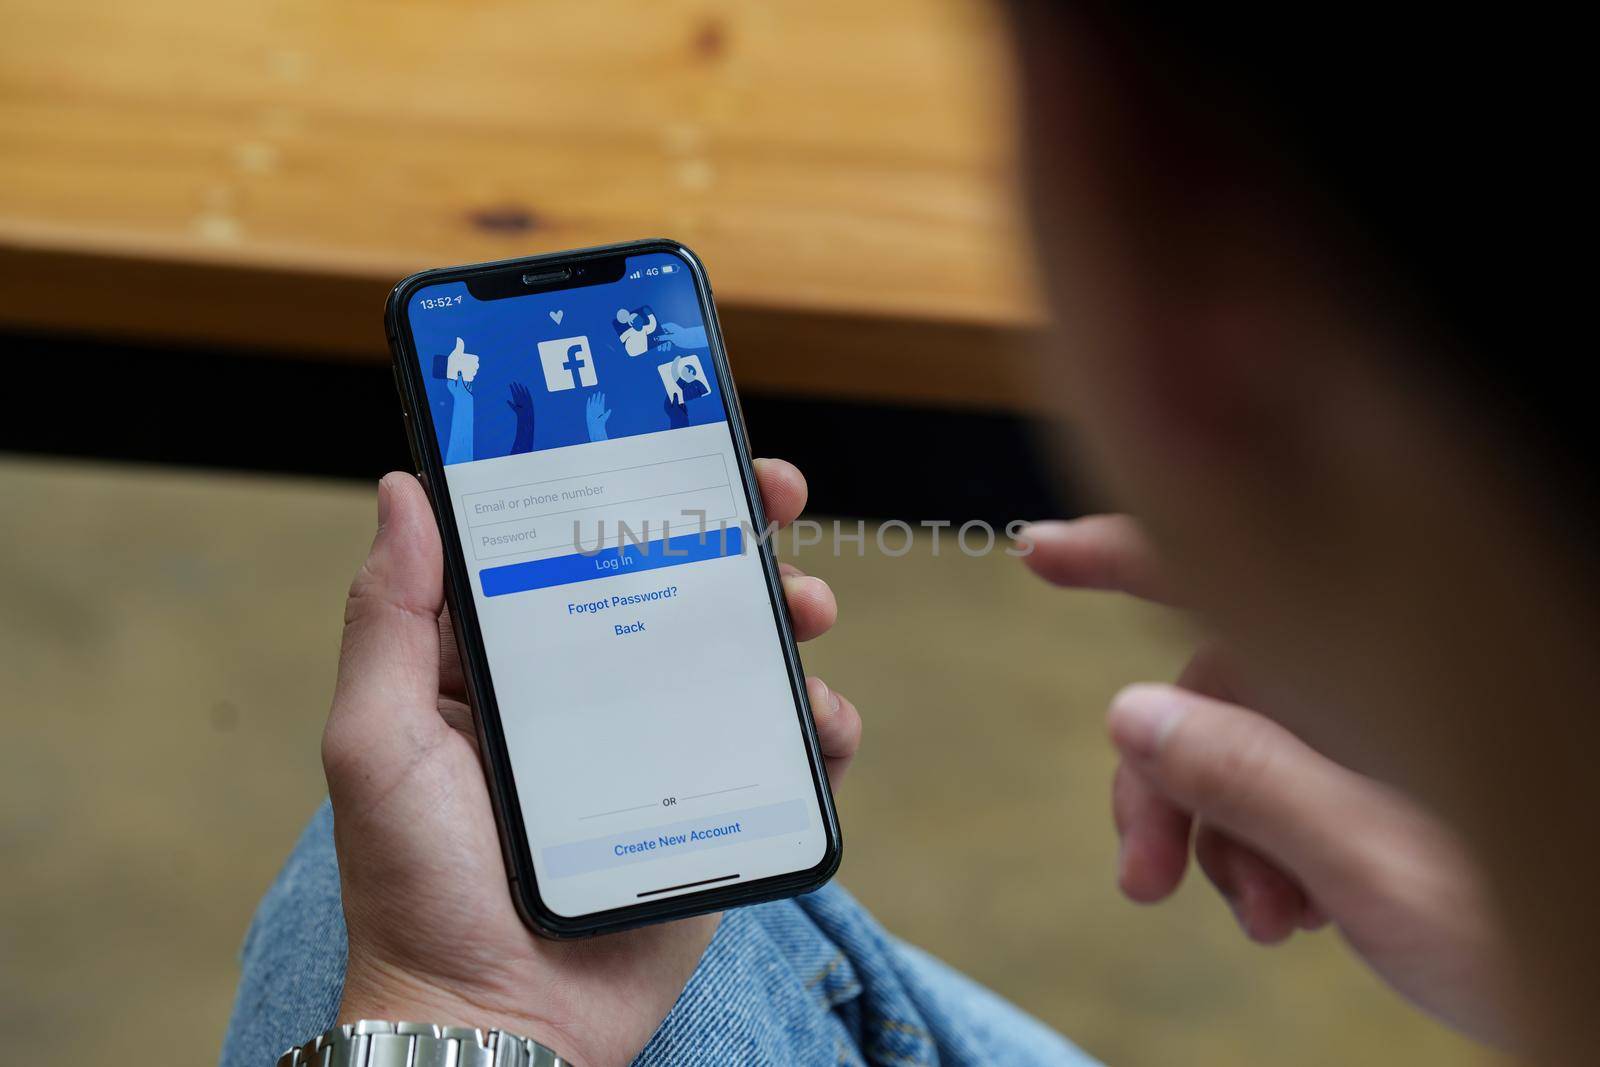 CHIANG MAI, THAILAND - AUG 25, 2022 : A man holds Apple iPhone with facebook application on the screen.facebook is a photo-sharing app for smartphones. facebook is a social network by itchaznong